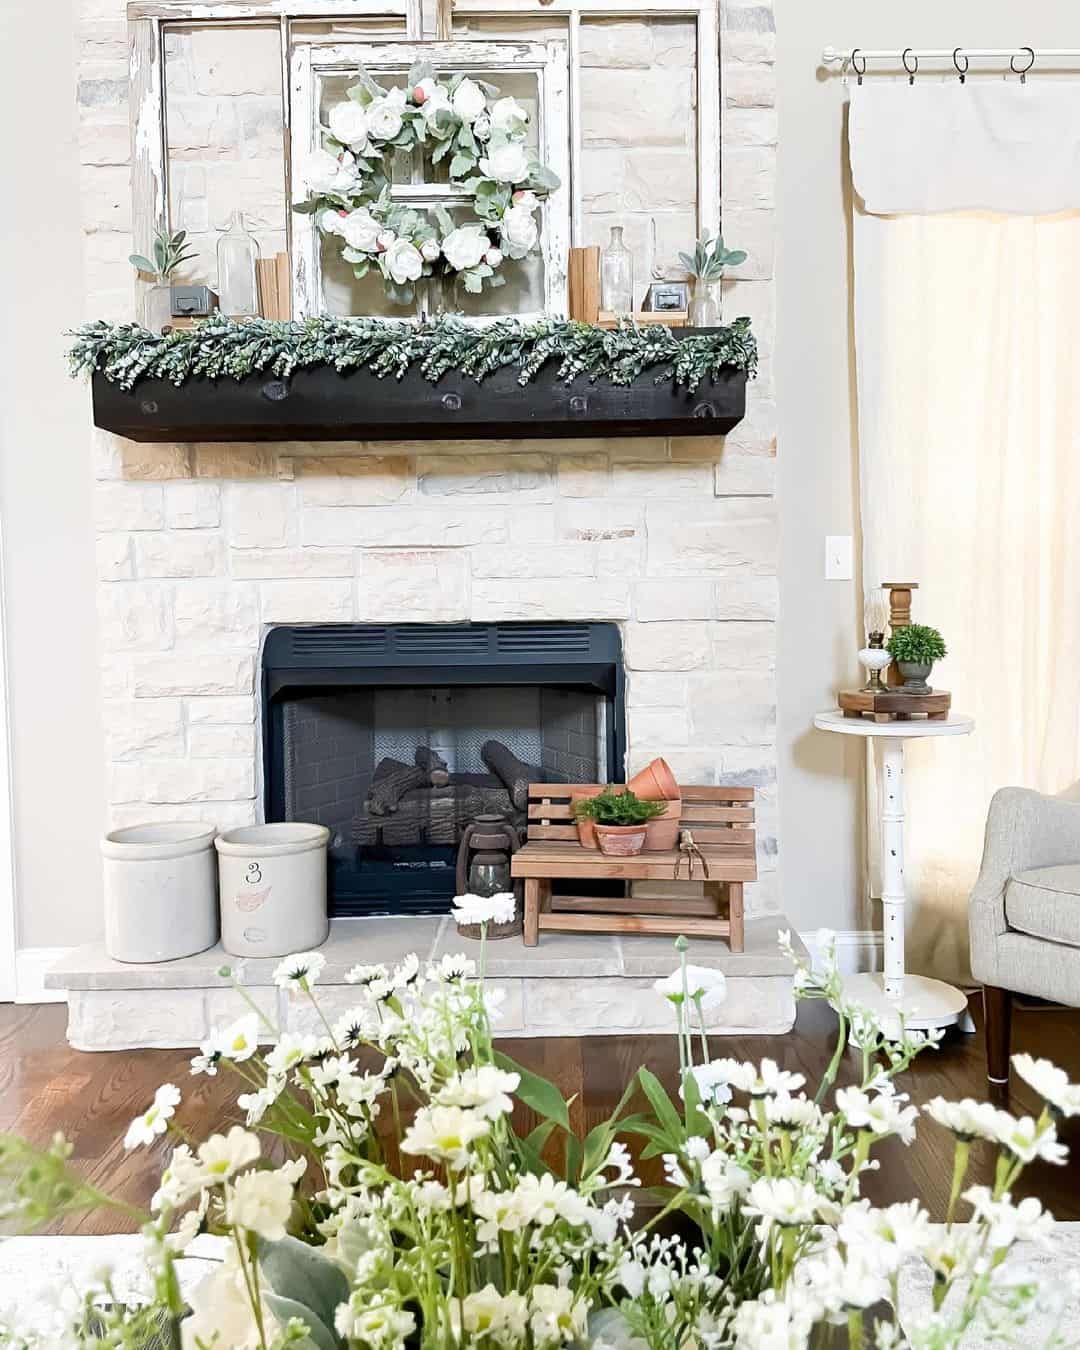 Love the basket with blanket in front of the fireplace--Great textures